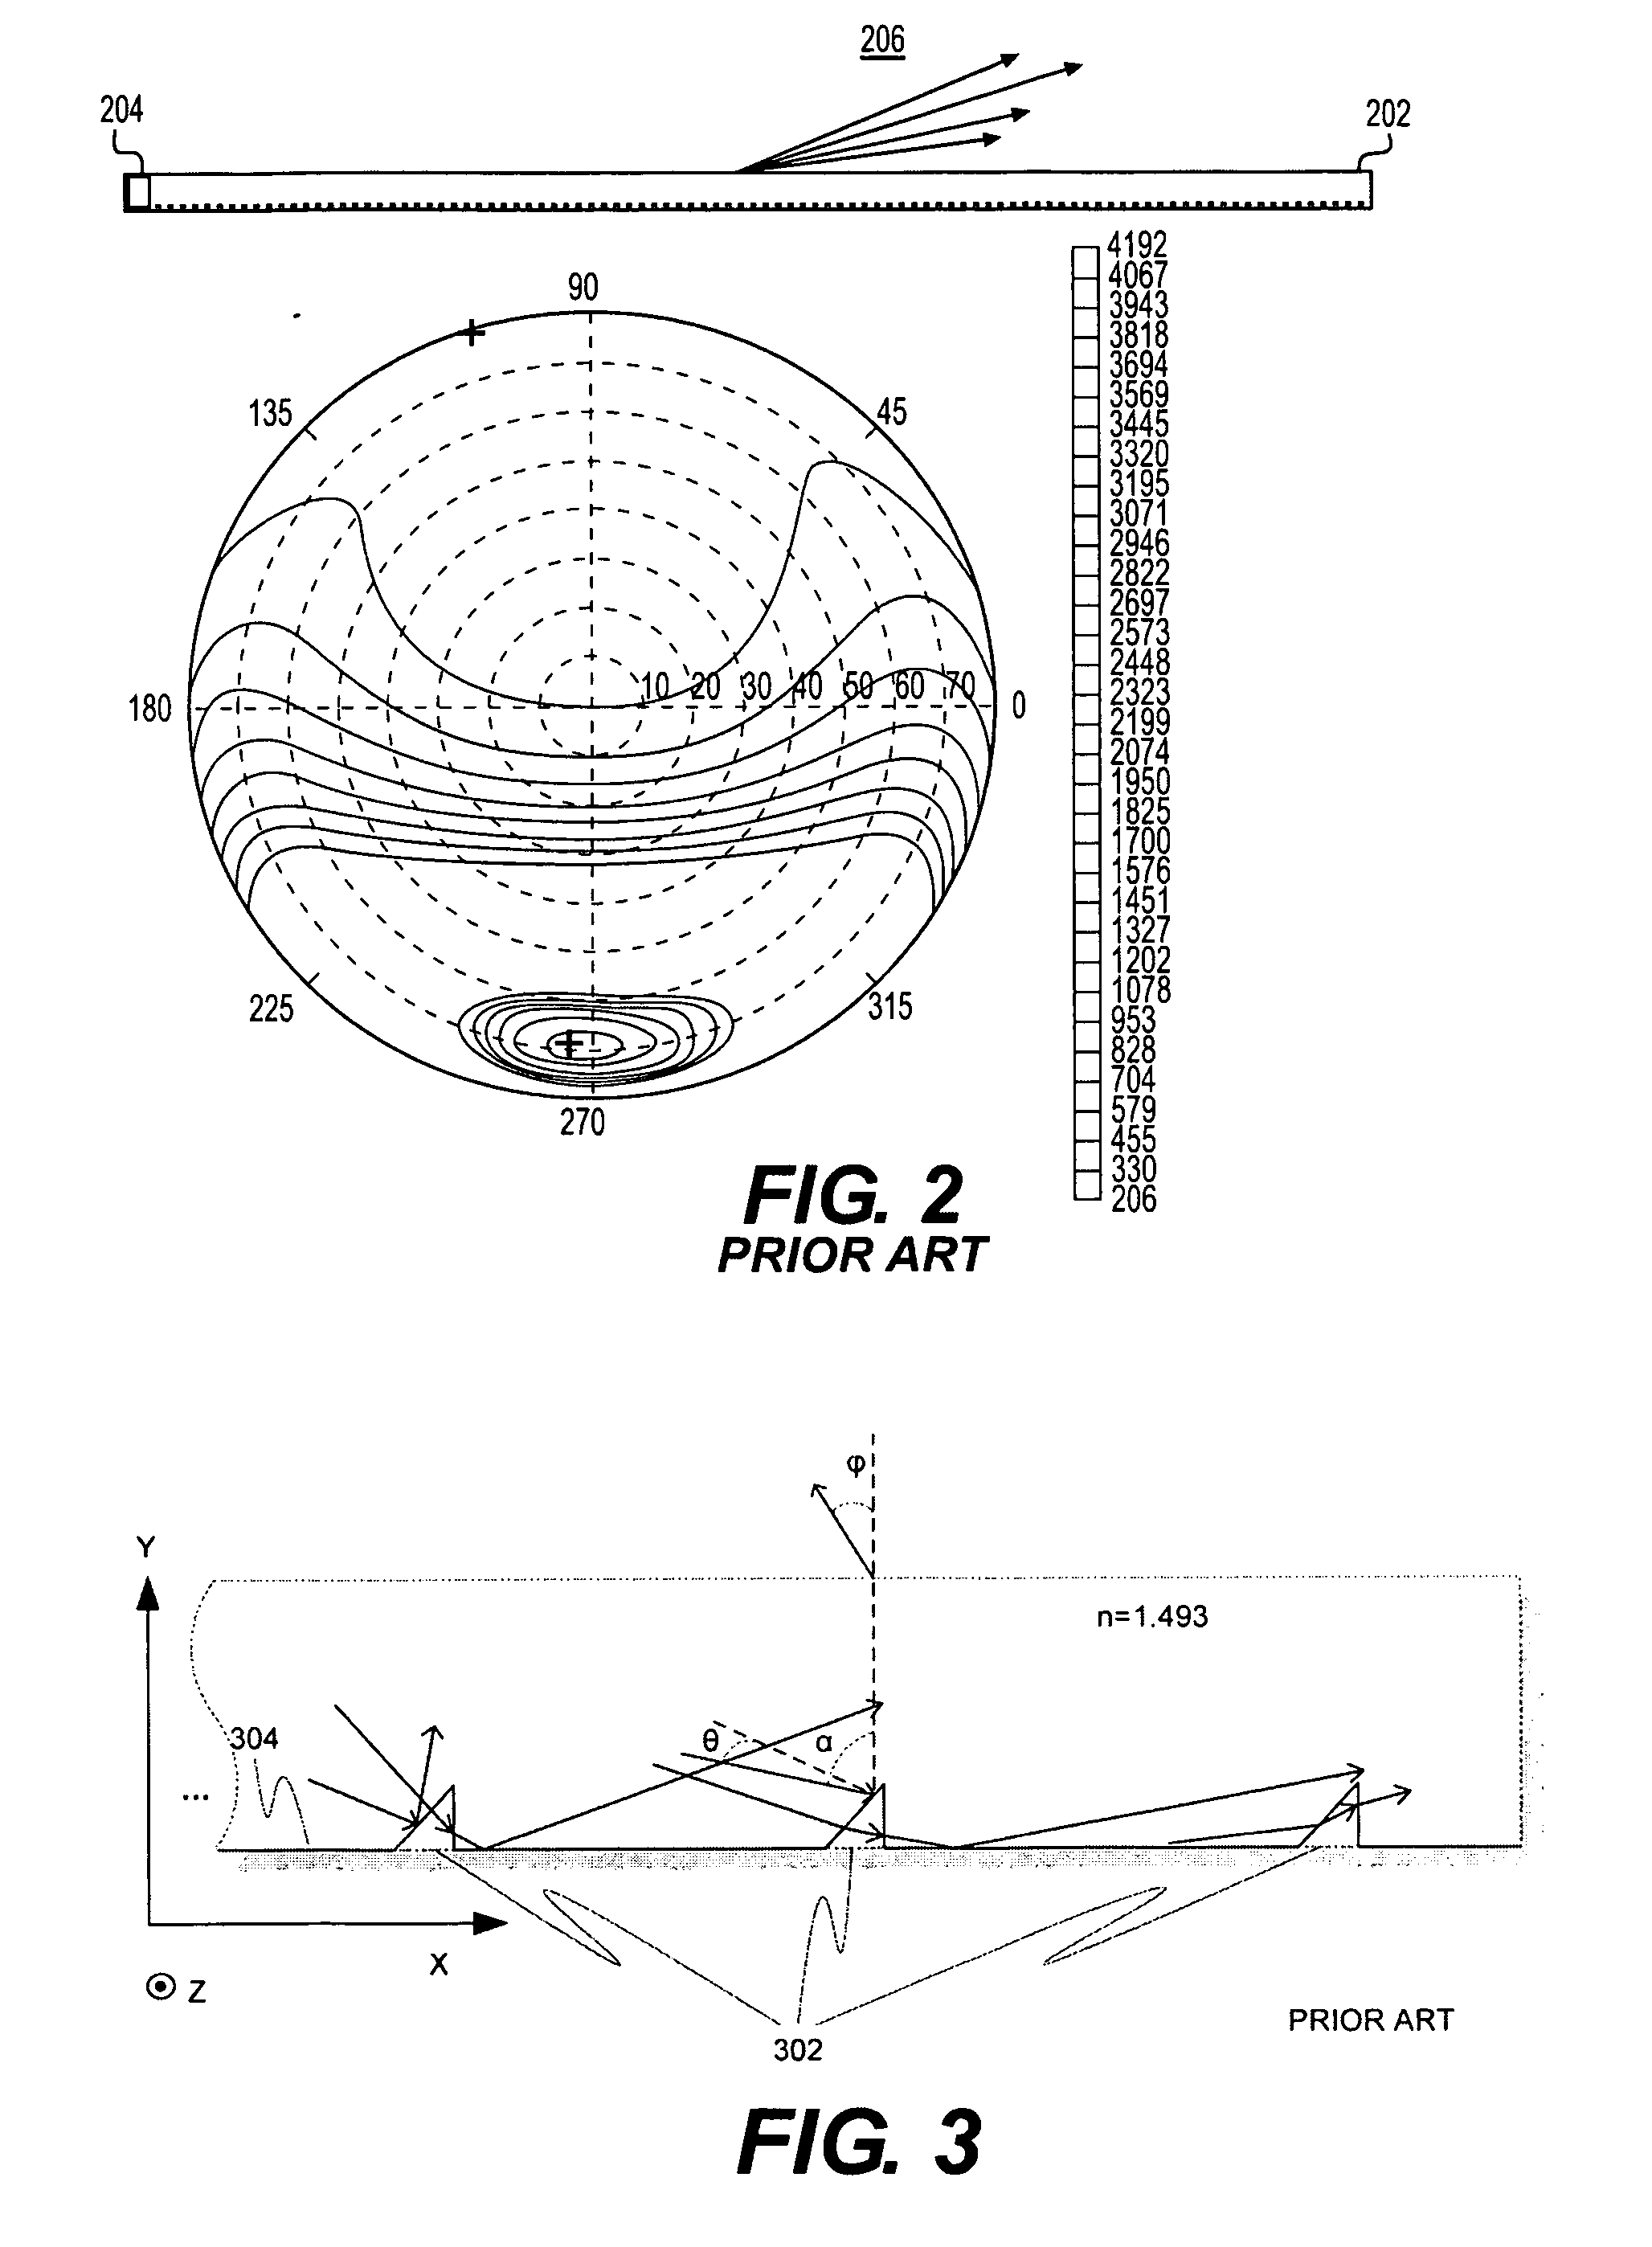 Light outcoupling structure for a lighting device